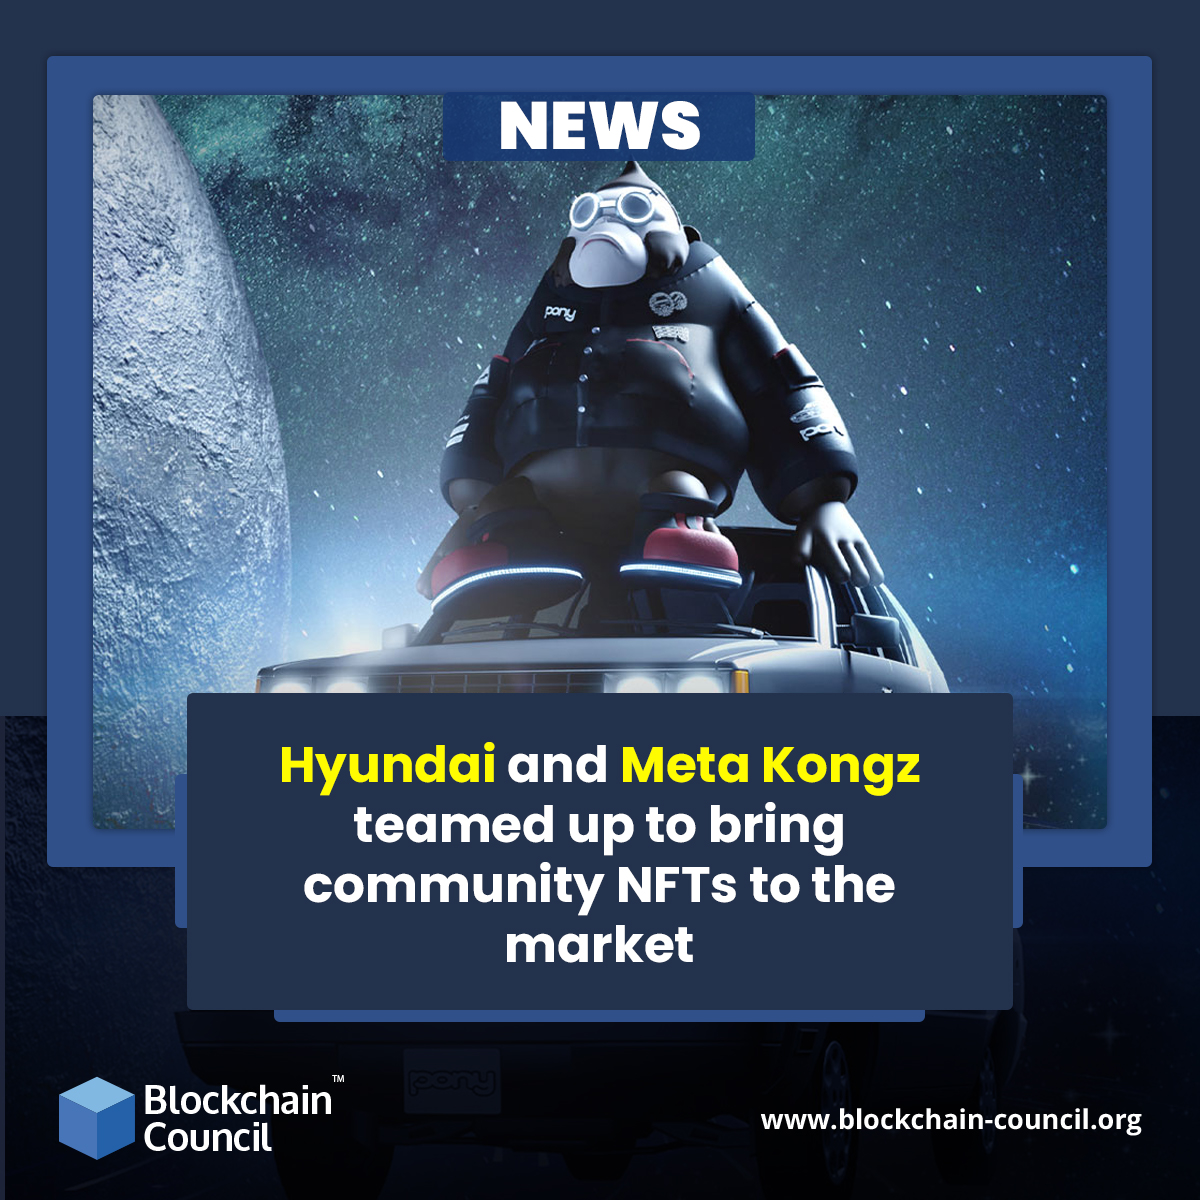 Hyundai and Meta Kongz teamed up to bring community NFTs to the market